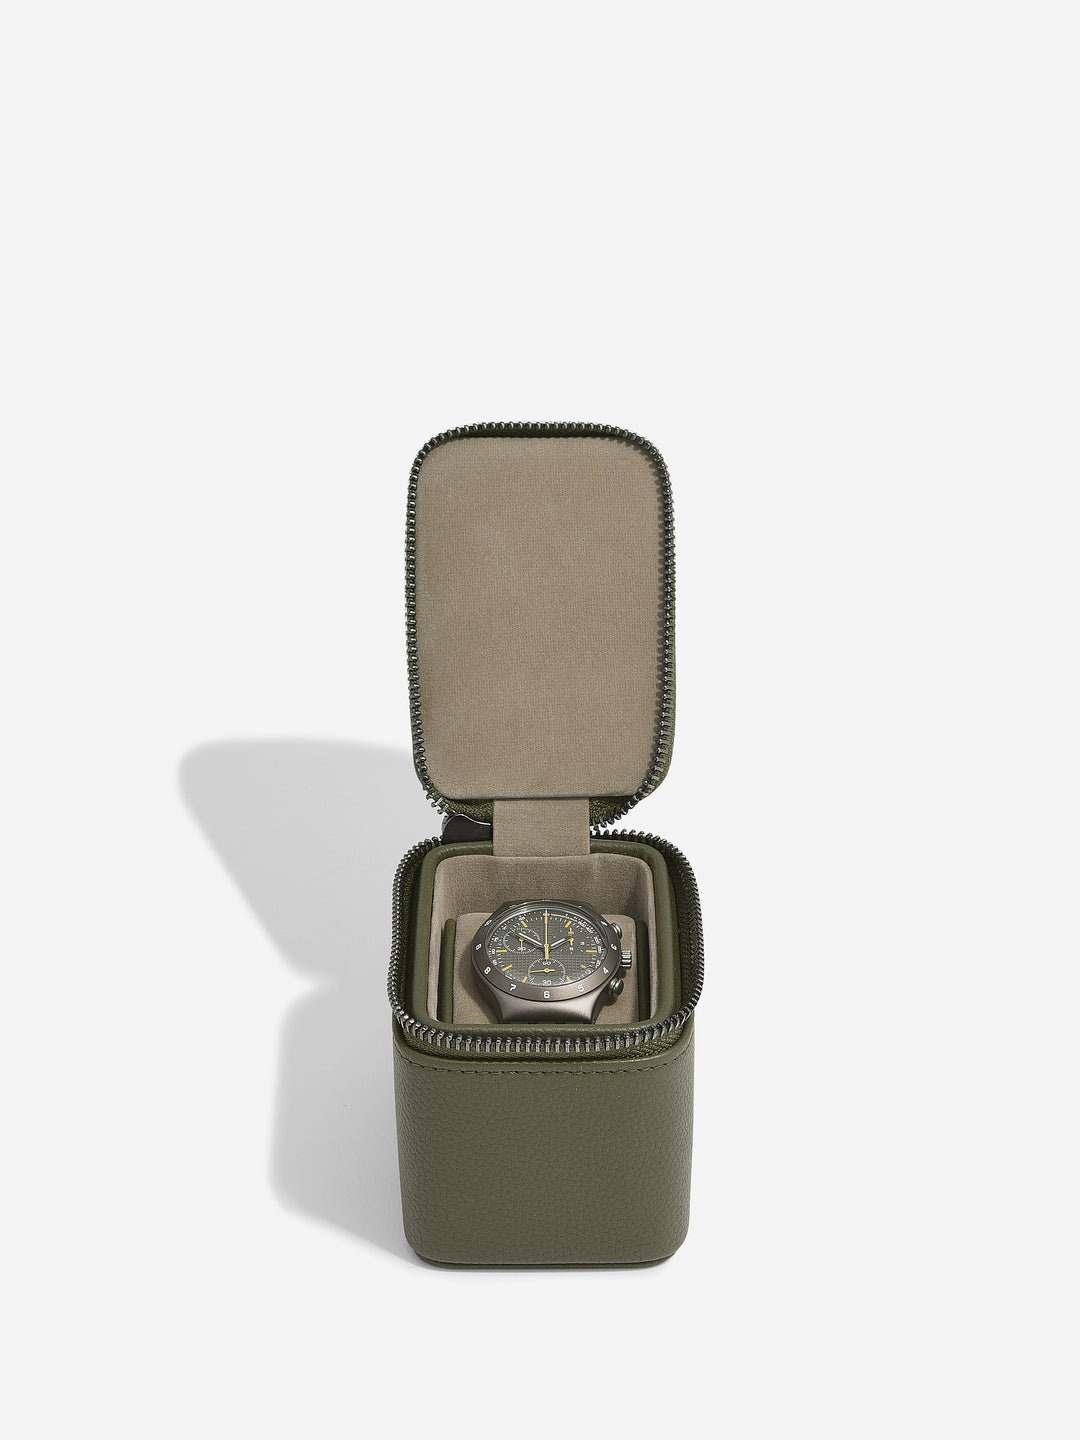 Stackers | Travel Watch Box - Olive Green